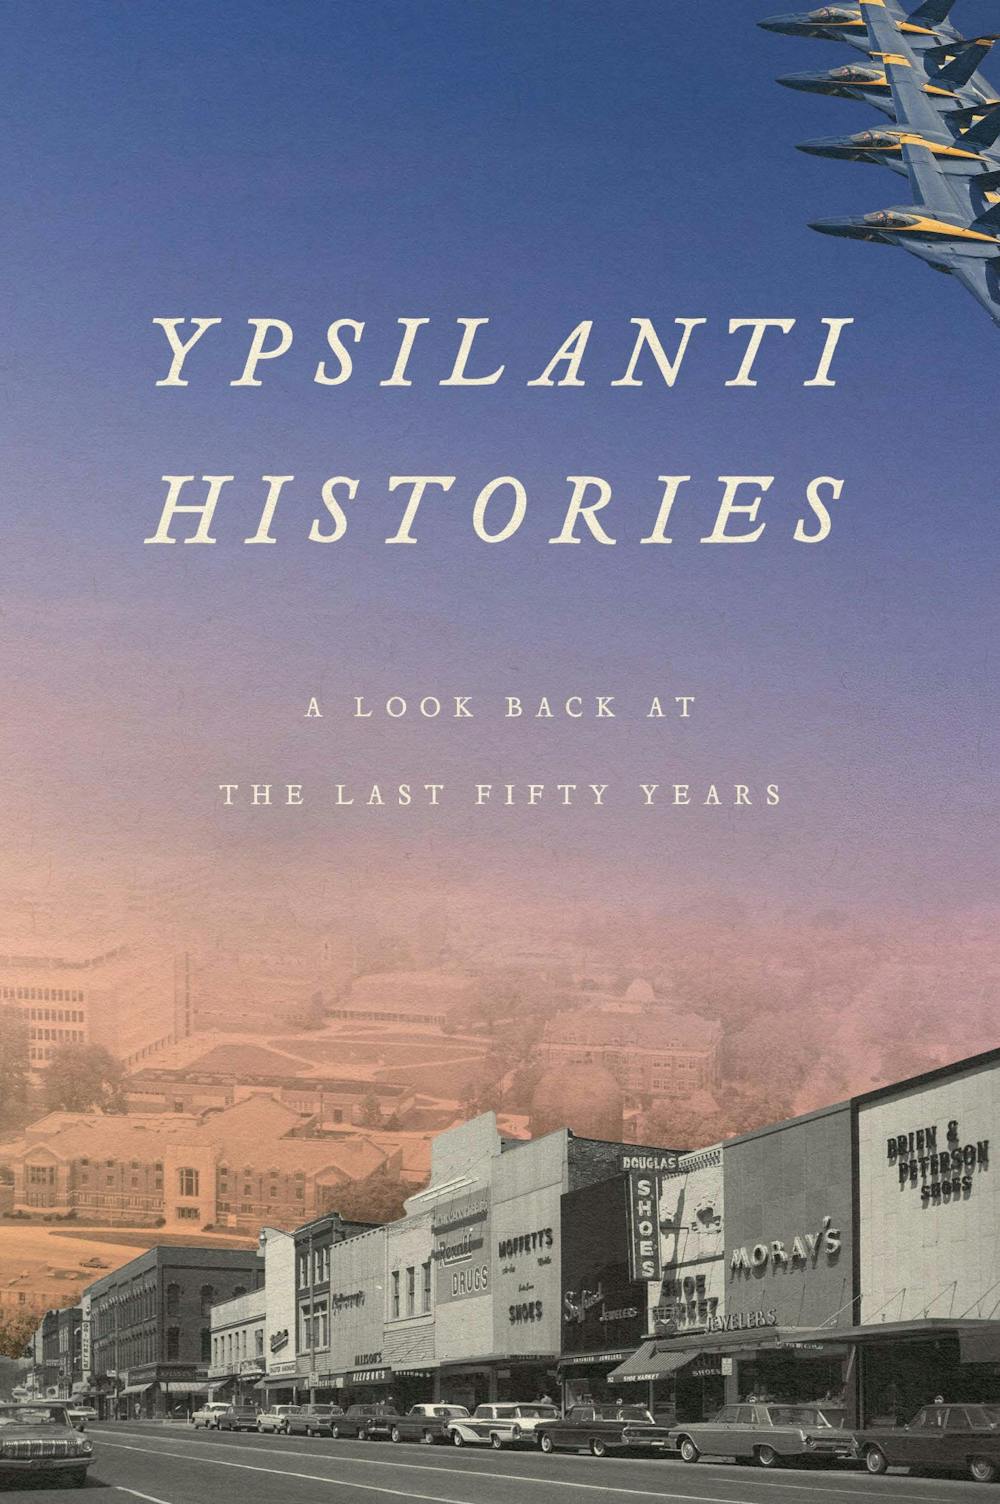 New Ypsilanti book details the last 50 years of the city 